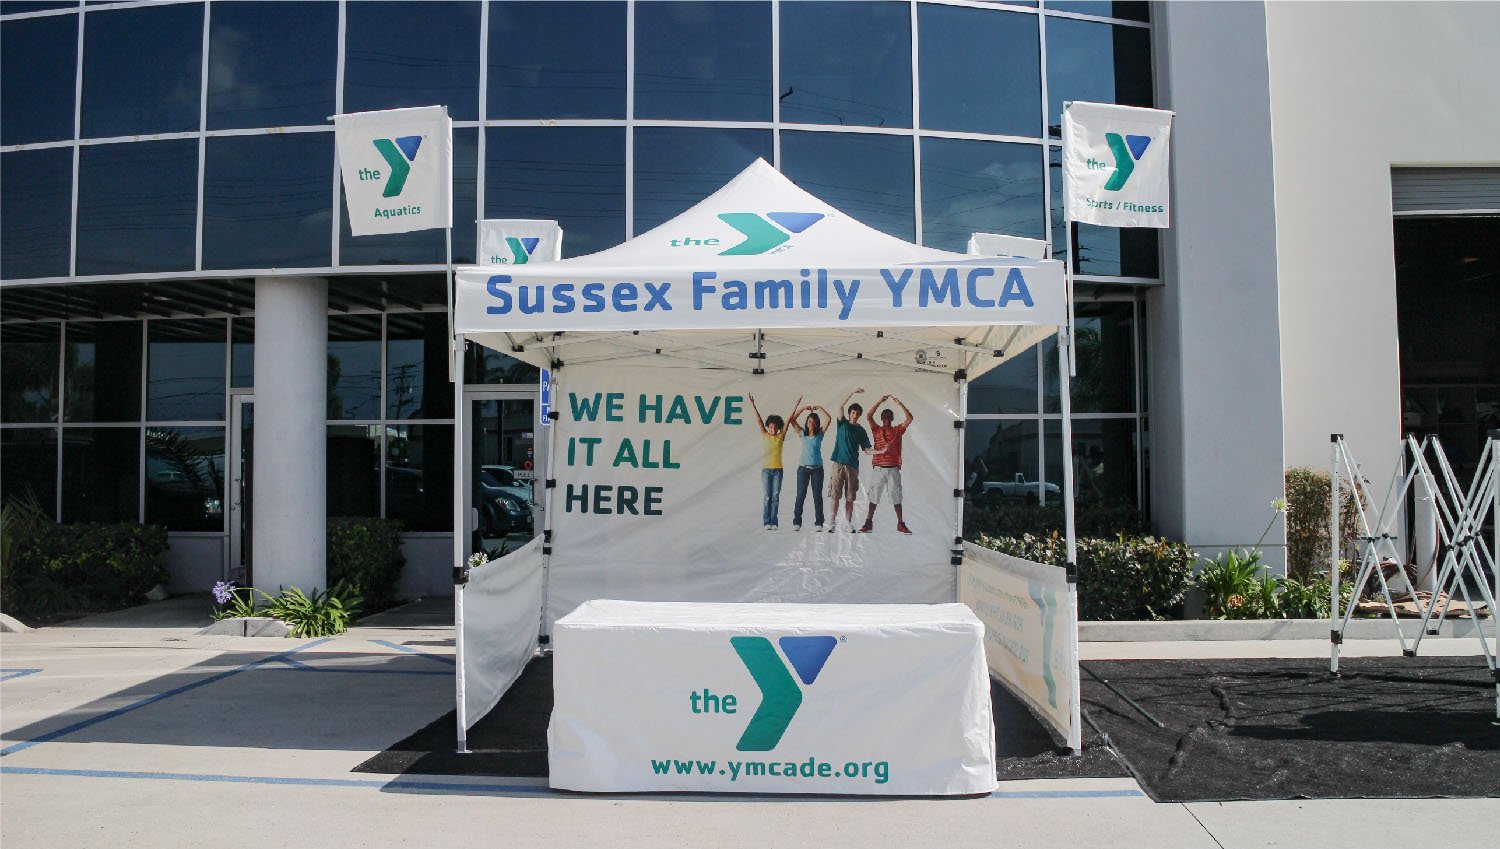 Customized canopy with tent flags on all four corners, printed with the YMCA logo